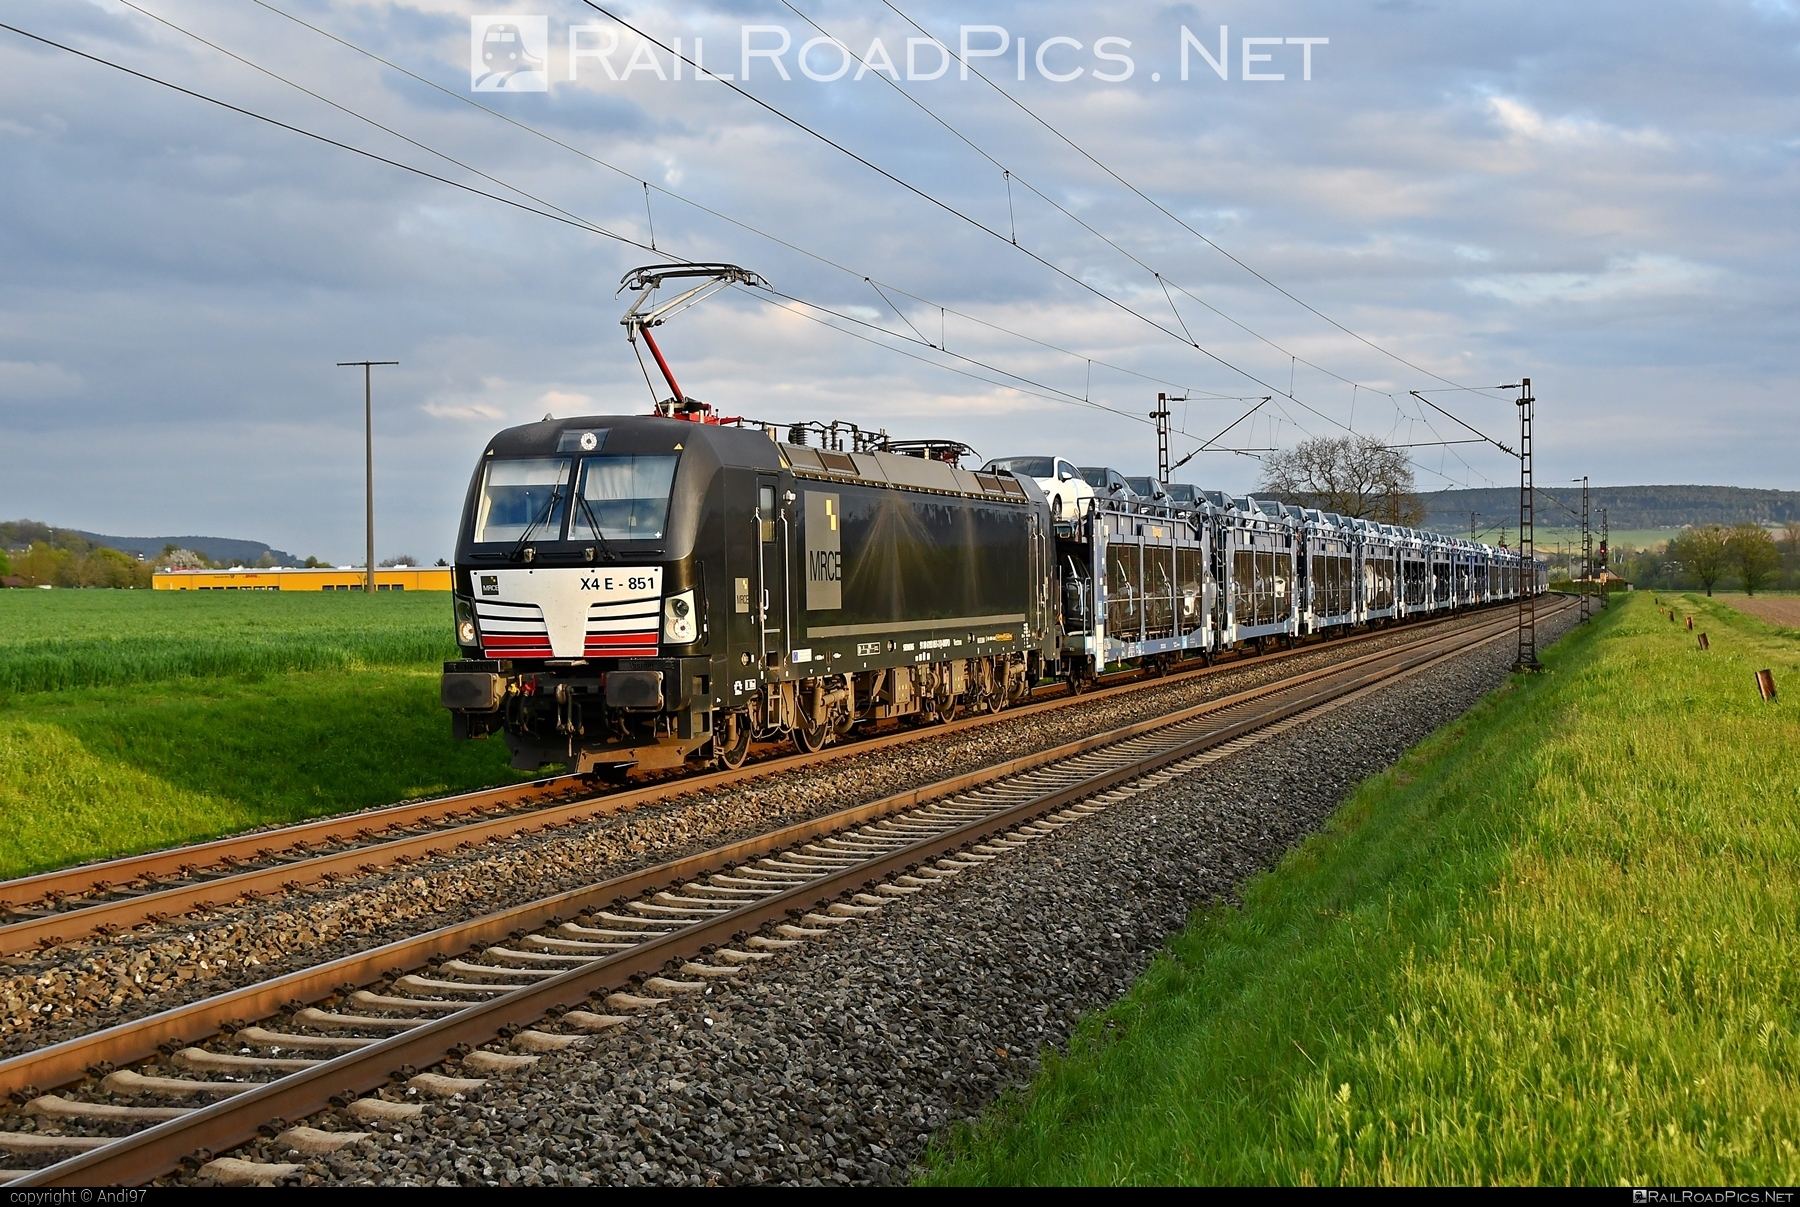 Siemens Vectron AC - 193 851 operated by RTB Cargo GmbH #carcarrierwagon #dispolok #mitsuirailcapitaleurope #mitsuirailcapitaleuropegmbh #mrce #rtb #rtbcargo #siemens #siemensVectron #siemensVectronAC #vectron #vectronAC